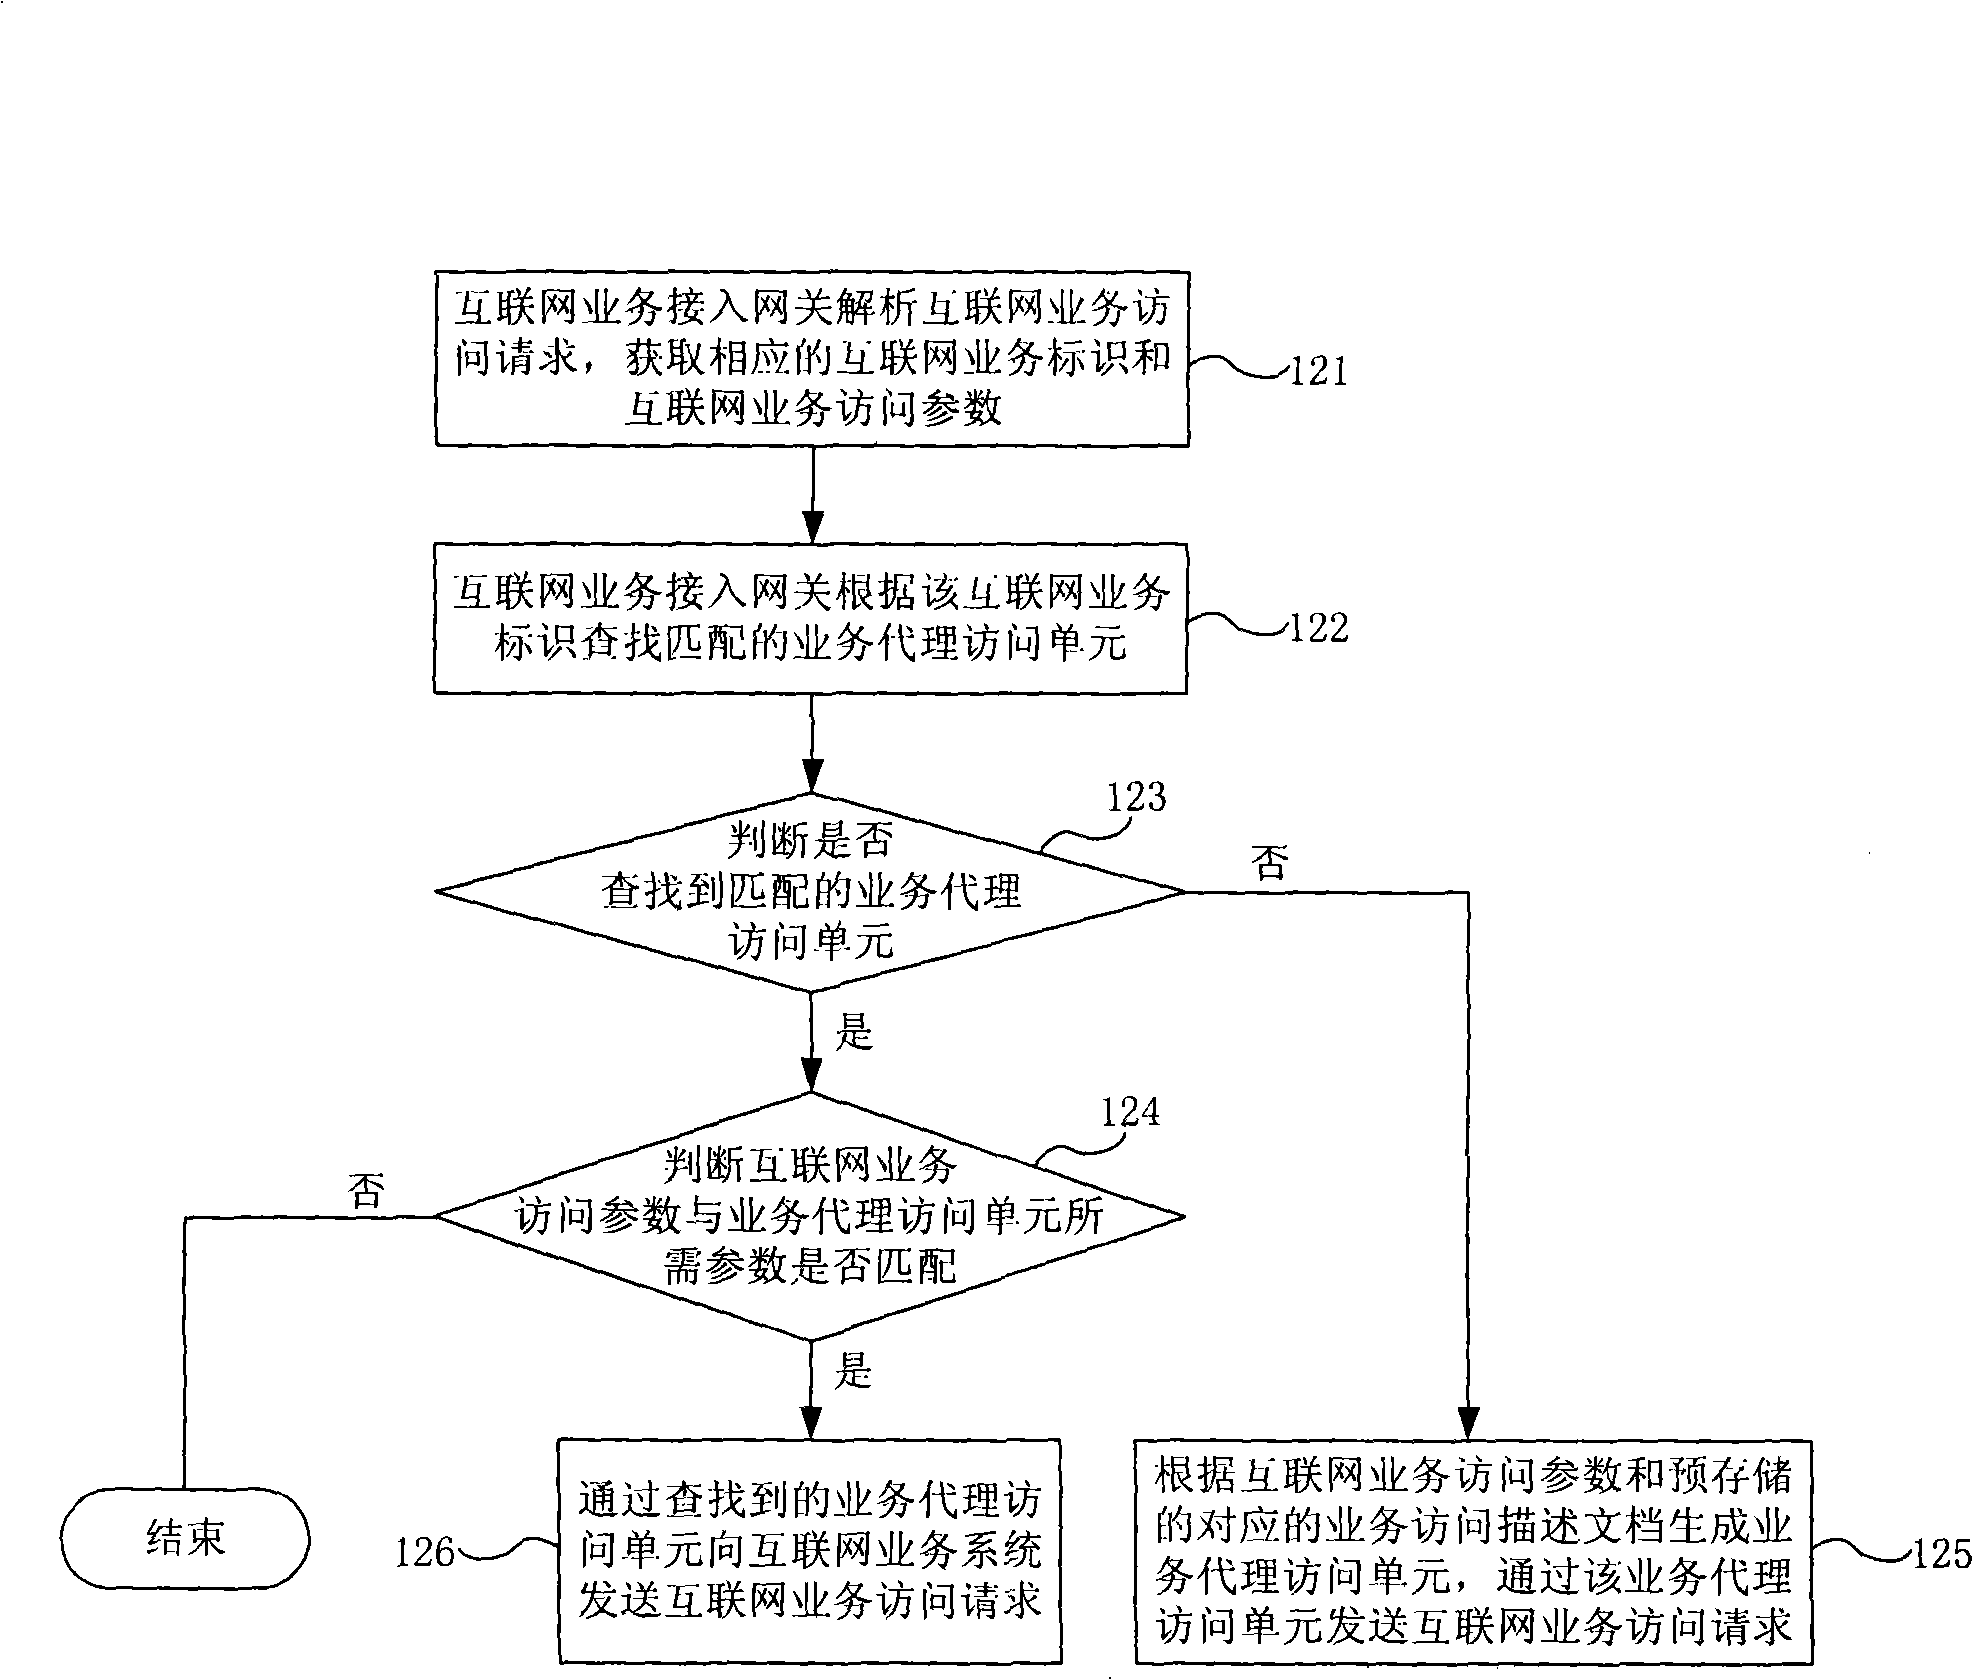 Method and system for implementing internet service access gate